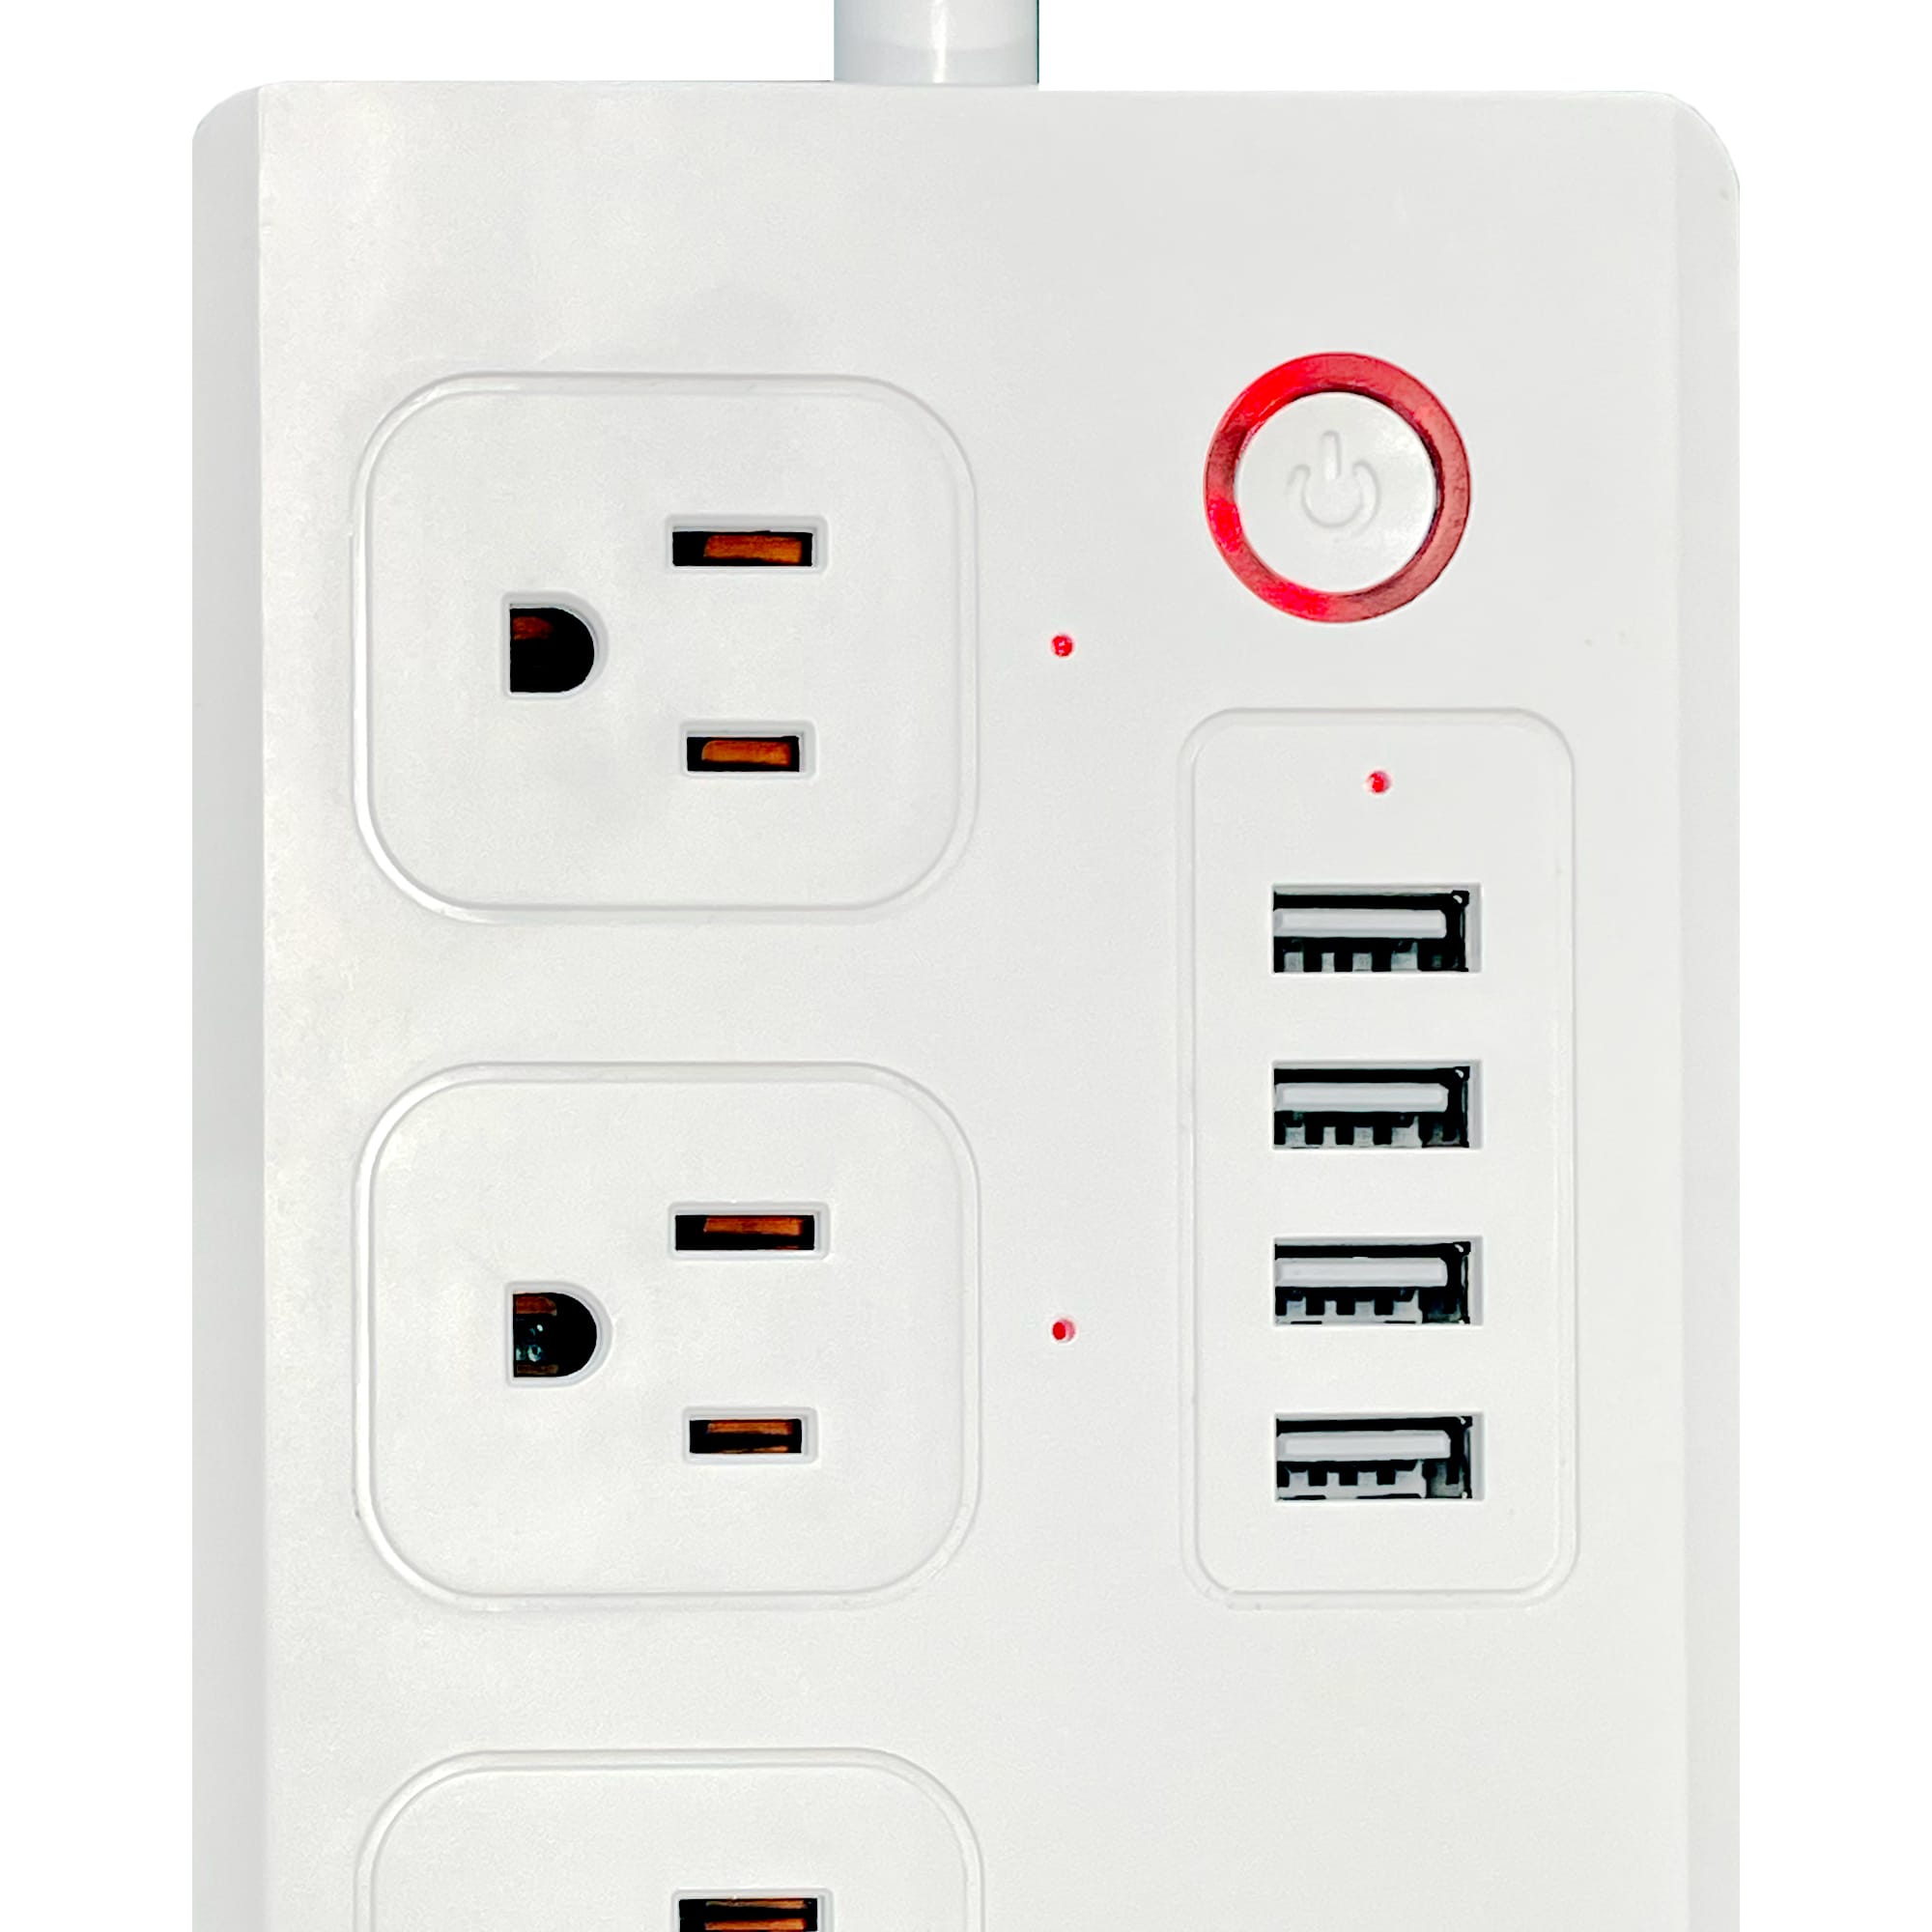 Hey abby R300 Smart Power Strip with 2.4G Wifi and LED